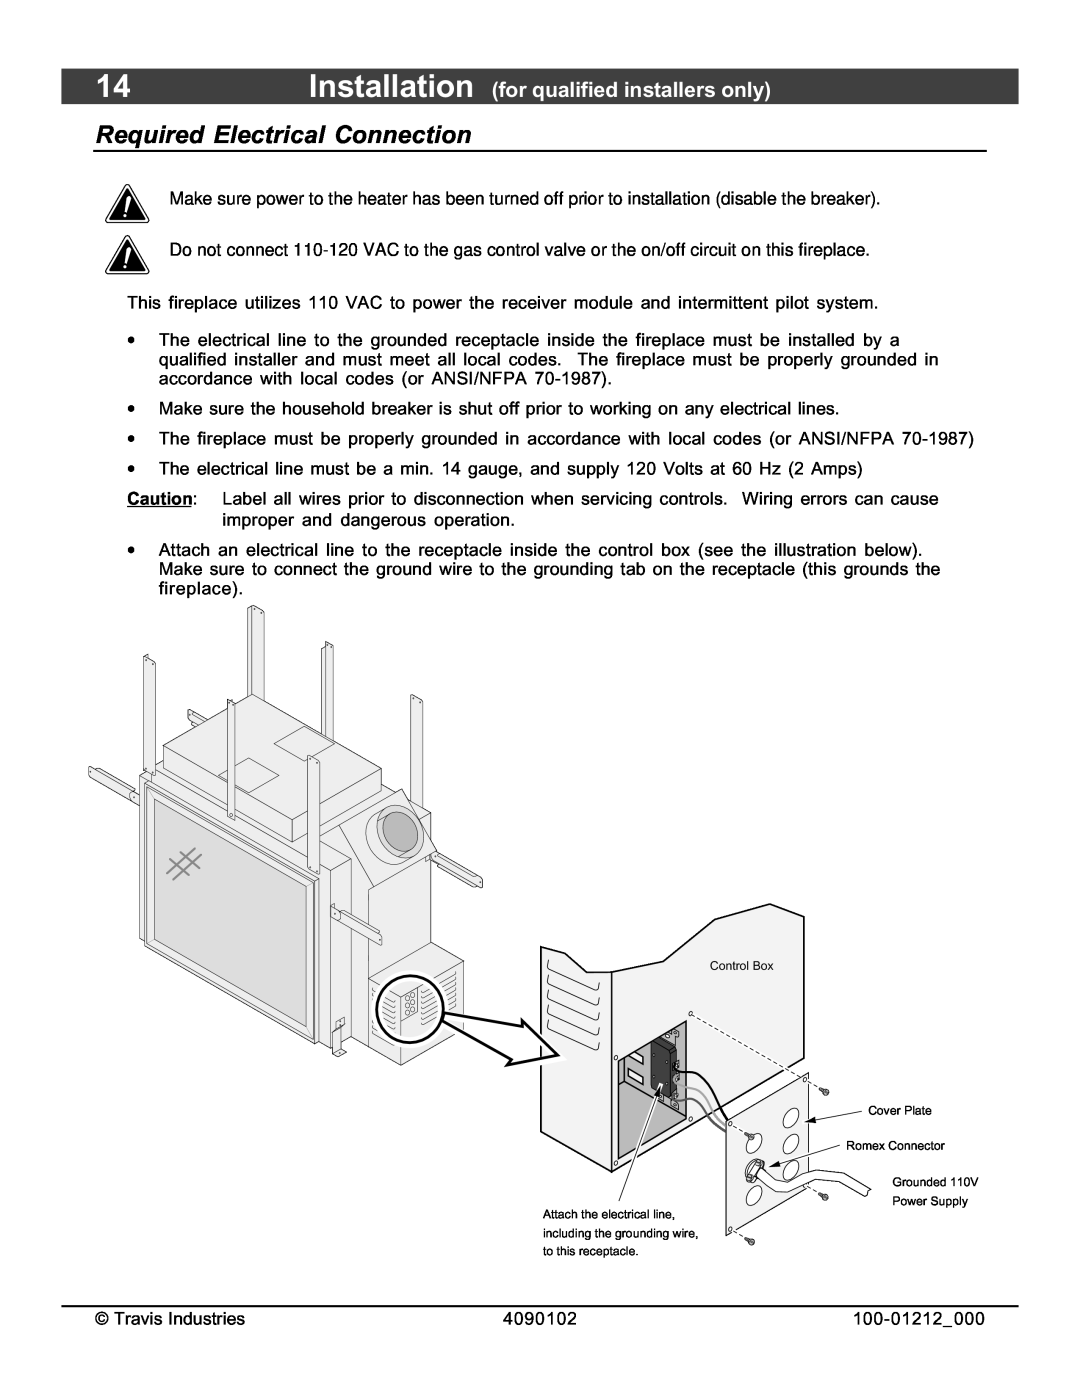 FireplaceXtrordinair 36CF installation manual Required Electrical Connection, Installation for qualified installers only 